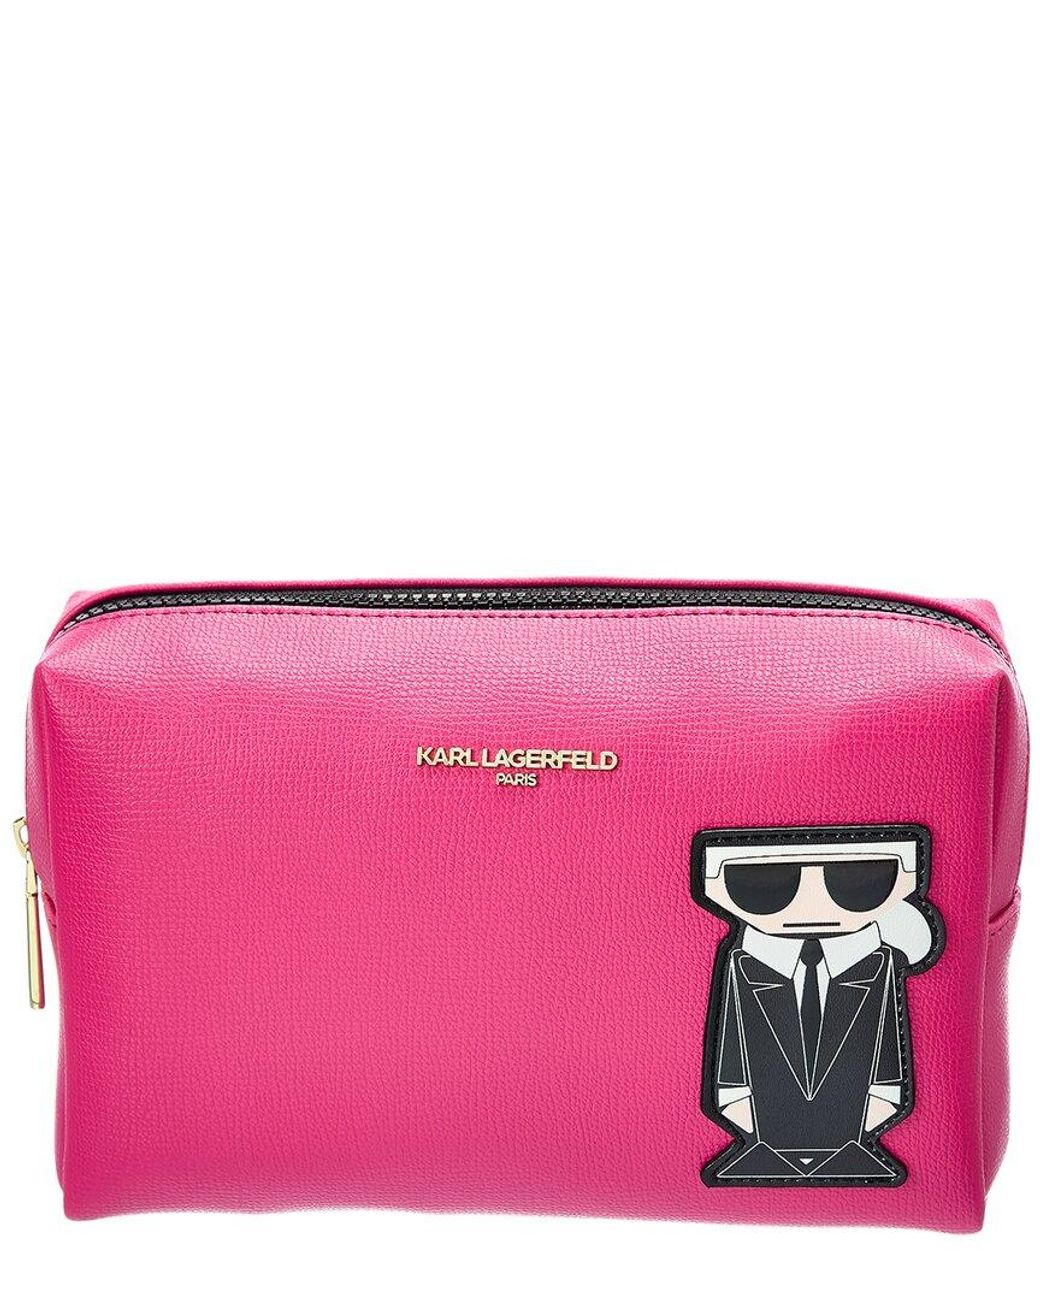 Karl Lagerfeld Maybelle Cosmetic Bag in Pink | Lyst